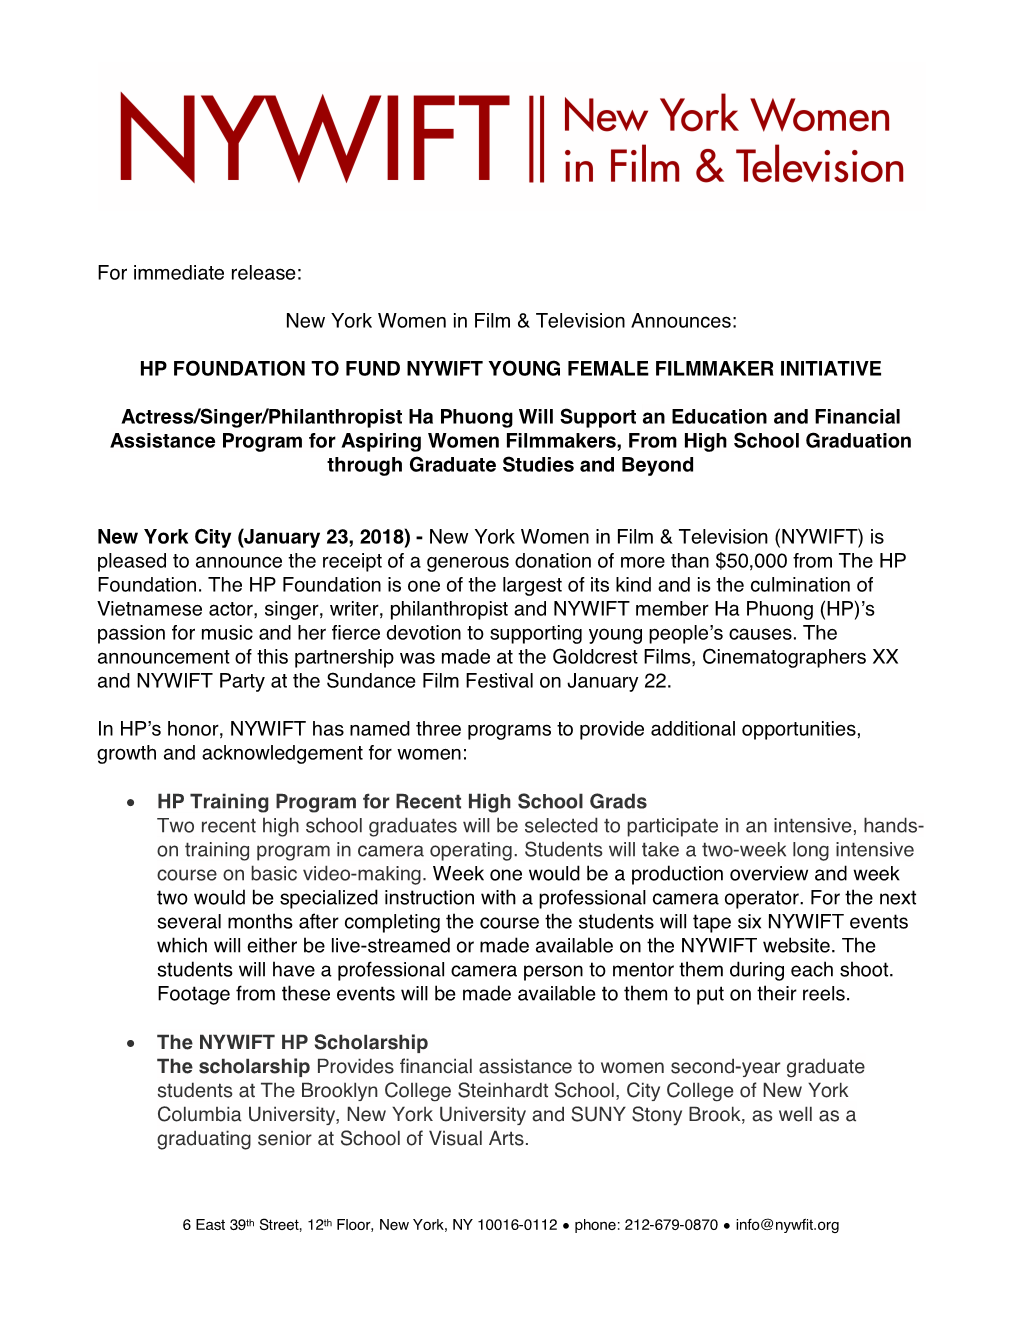 Hp Foundation to Fund Nywift Young Female Filmmaker Initiative